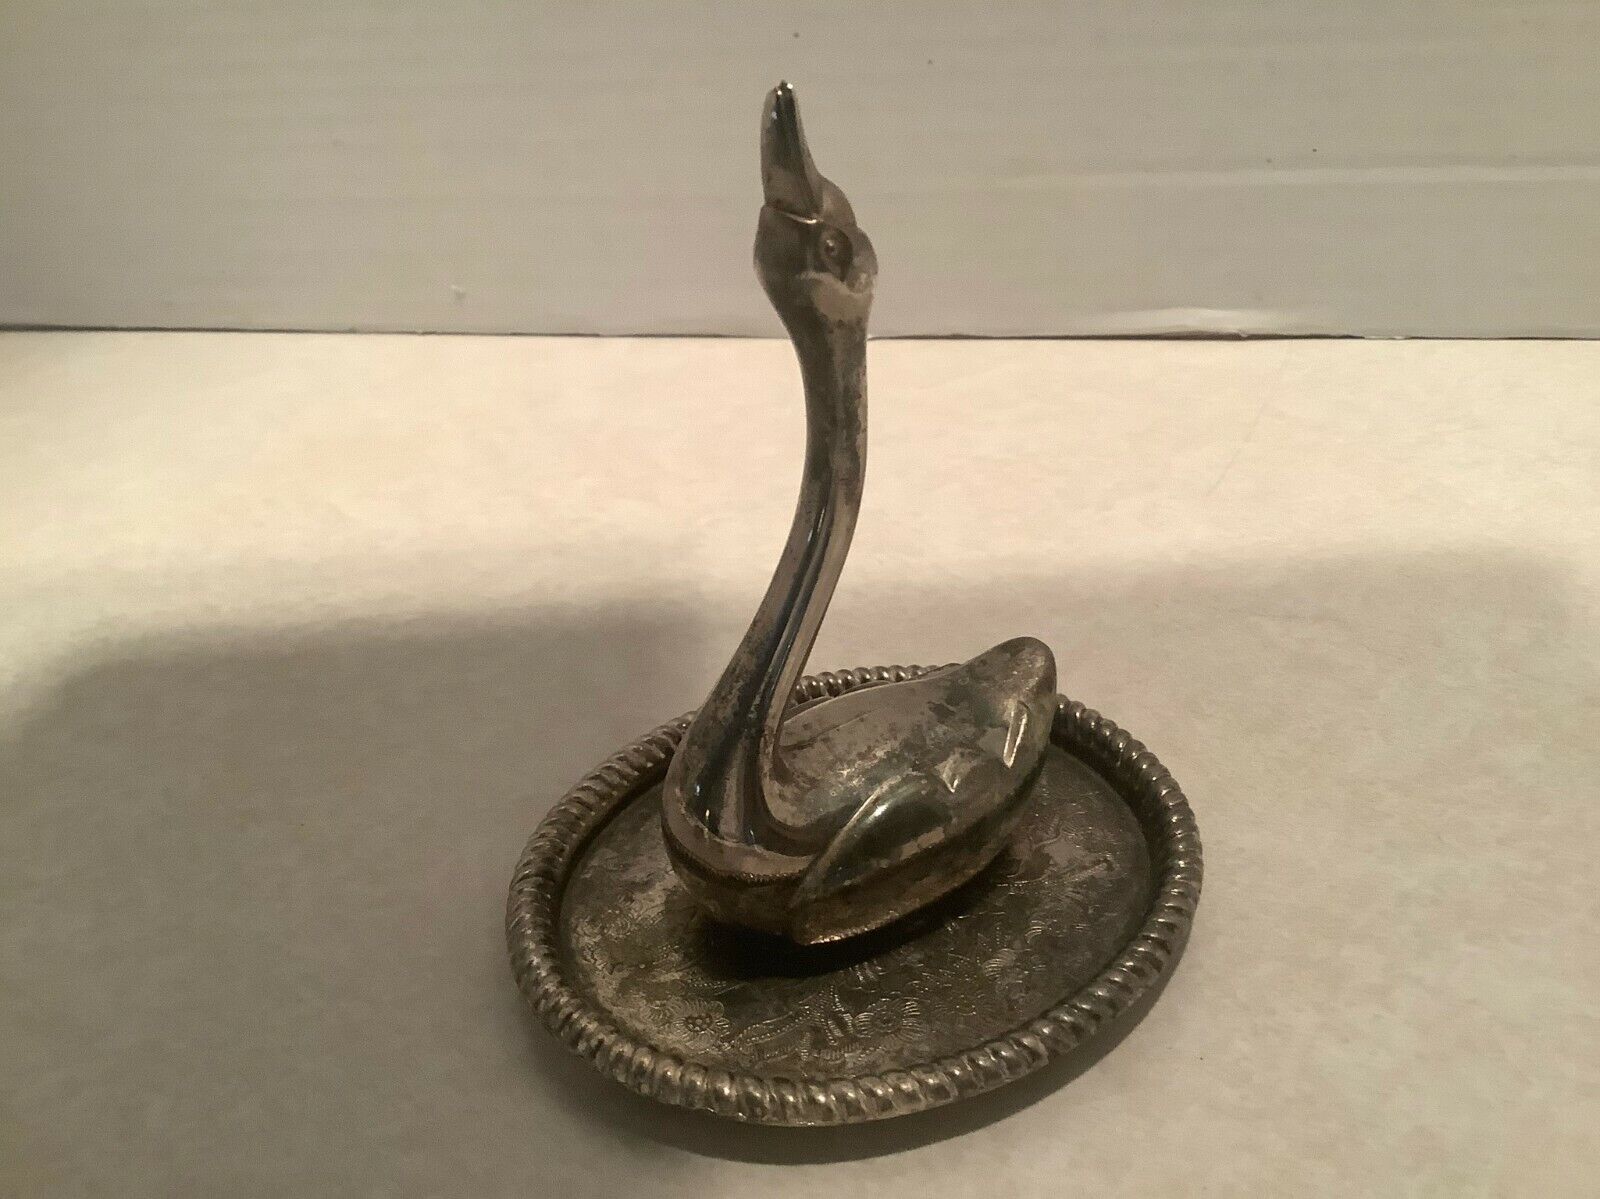 Vintage silverplate swan ring/jewelry tray